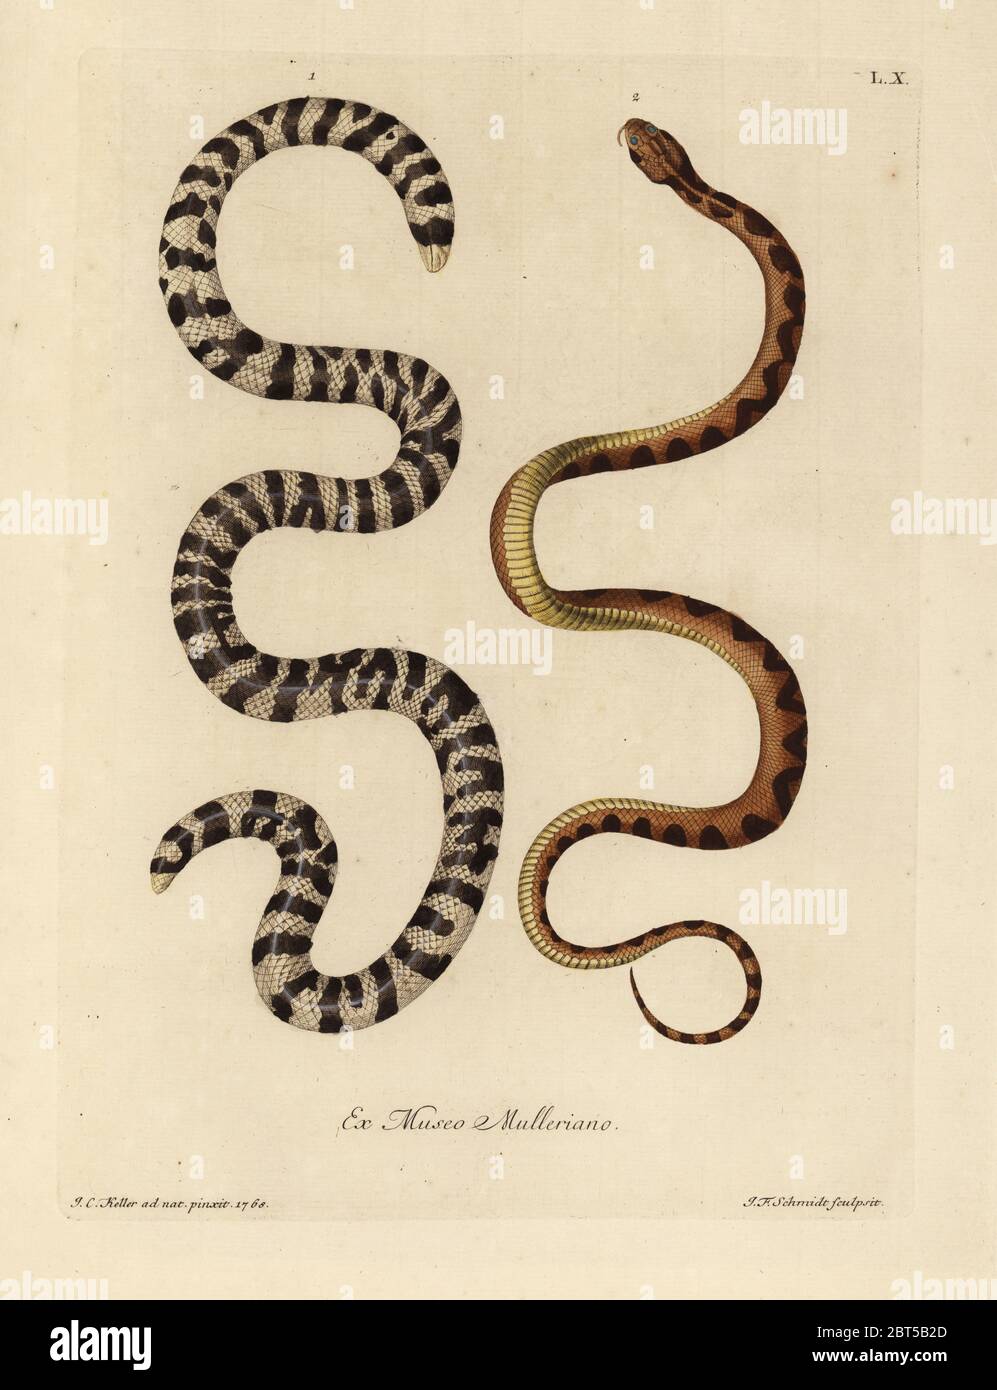 Black-and-white worm lizard, Amphisbaena fuliginosa, and brown and yellow snake of Surinam (Boa constrictor?). Le serpent dit a deux tetes, l'Amphisbaena fuliginosa, serpent de Surinam jaunatre, tachete de brun. Handcoloured copperplate engraving by Johann Friedrich Schmidt after an illustration from nature by Johann Christoph Keller from Georg Wolfgang Knorr's Deliciae Naturae Selectae of Kabinet van Zeldzaamheden der Natuur, Blusse and Son, Nuremberg, 1771. Specimens from a Wunderkammer or Cabinet of Curiosities owned by P.L. Muller. Stock Photo